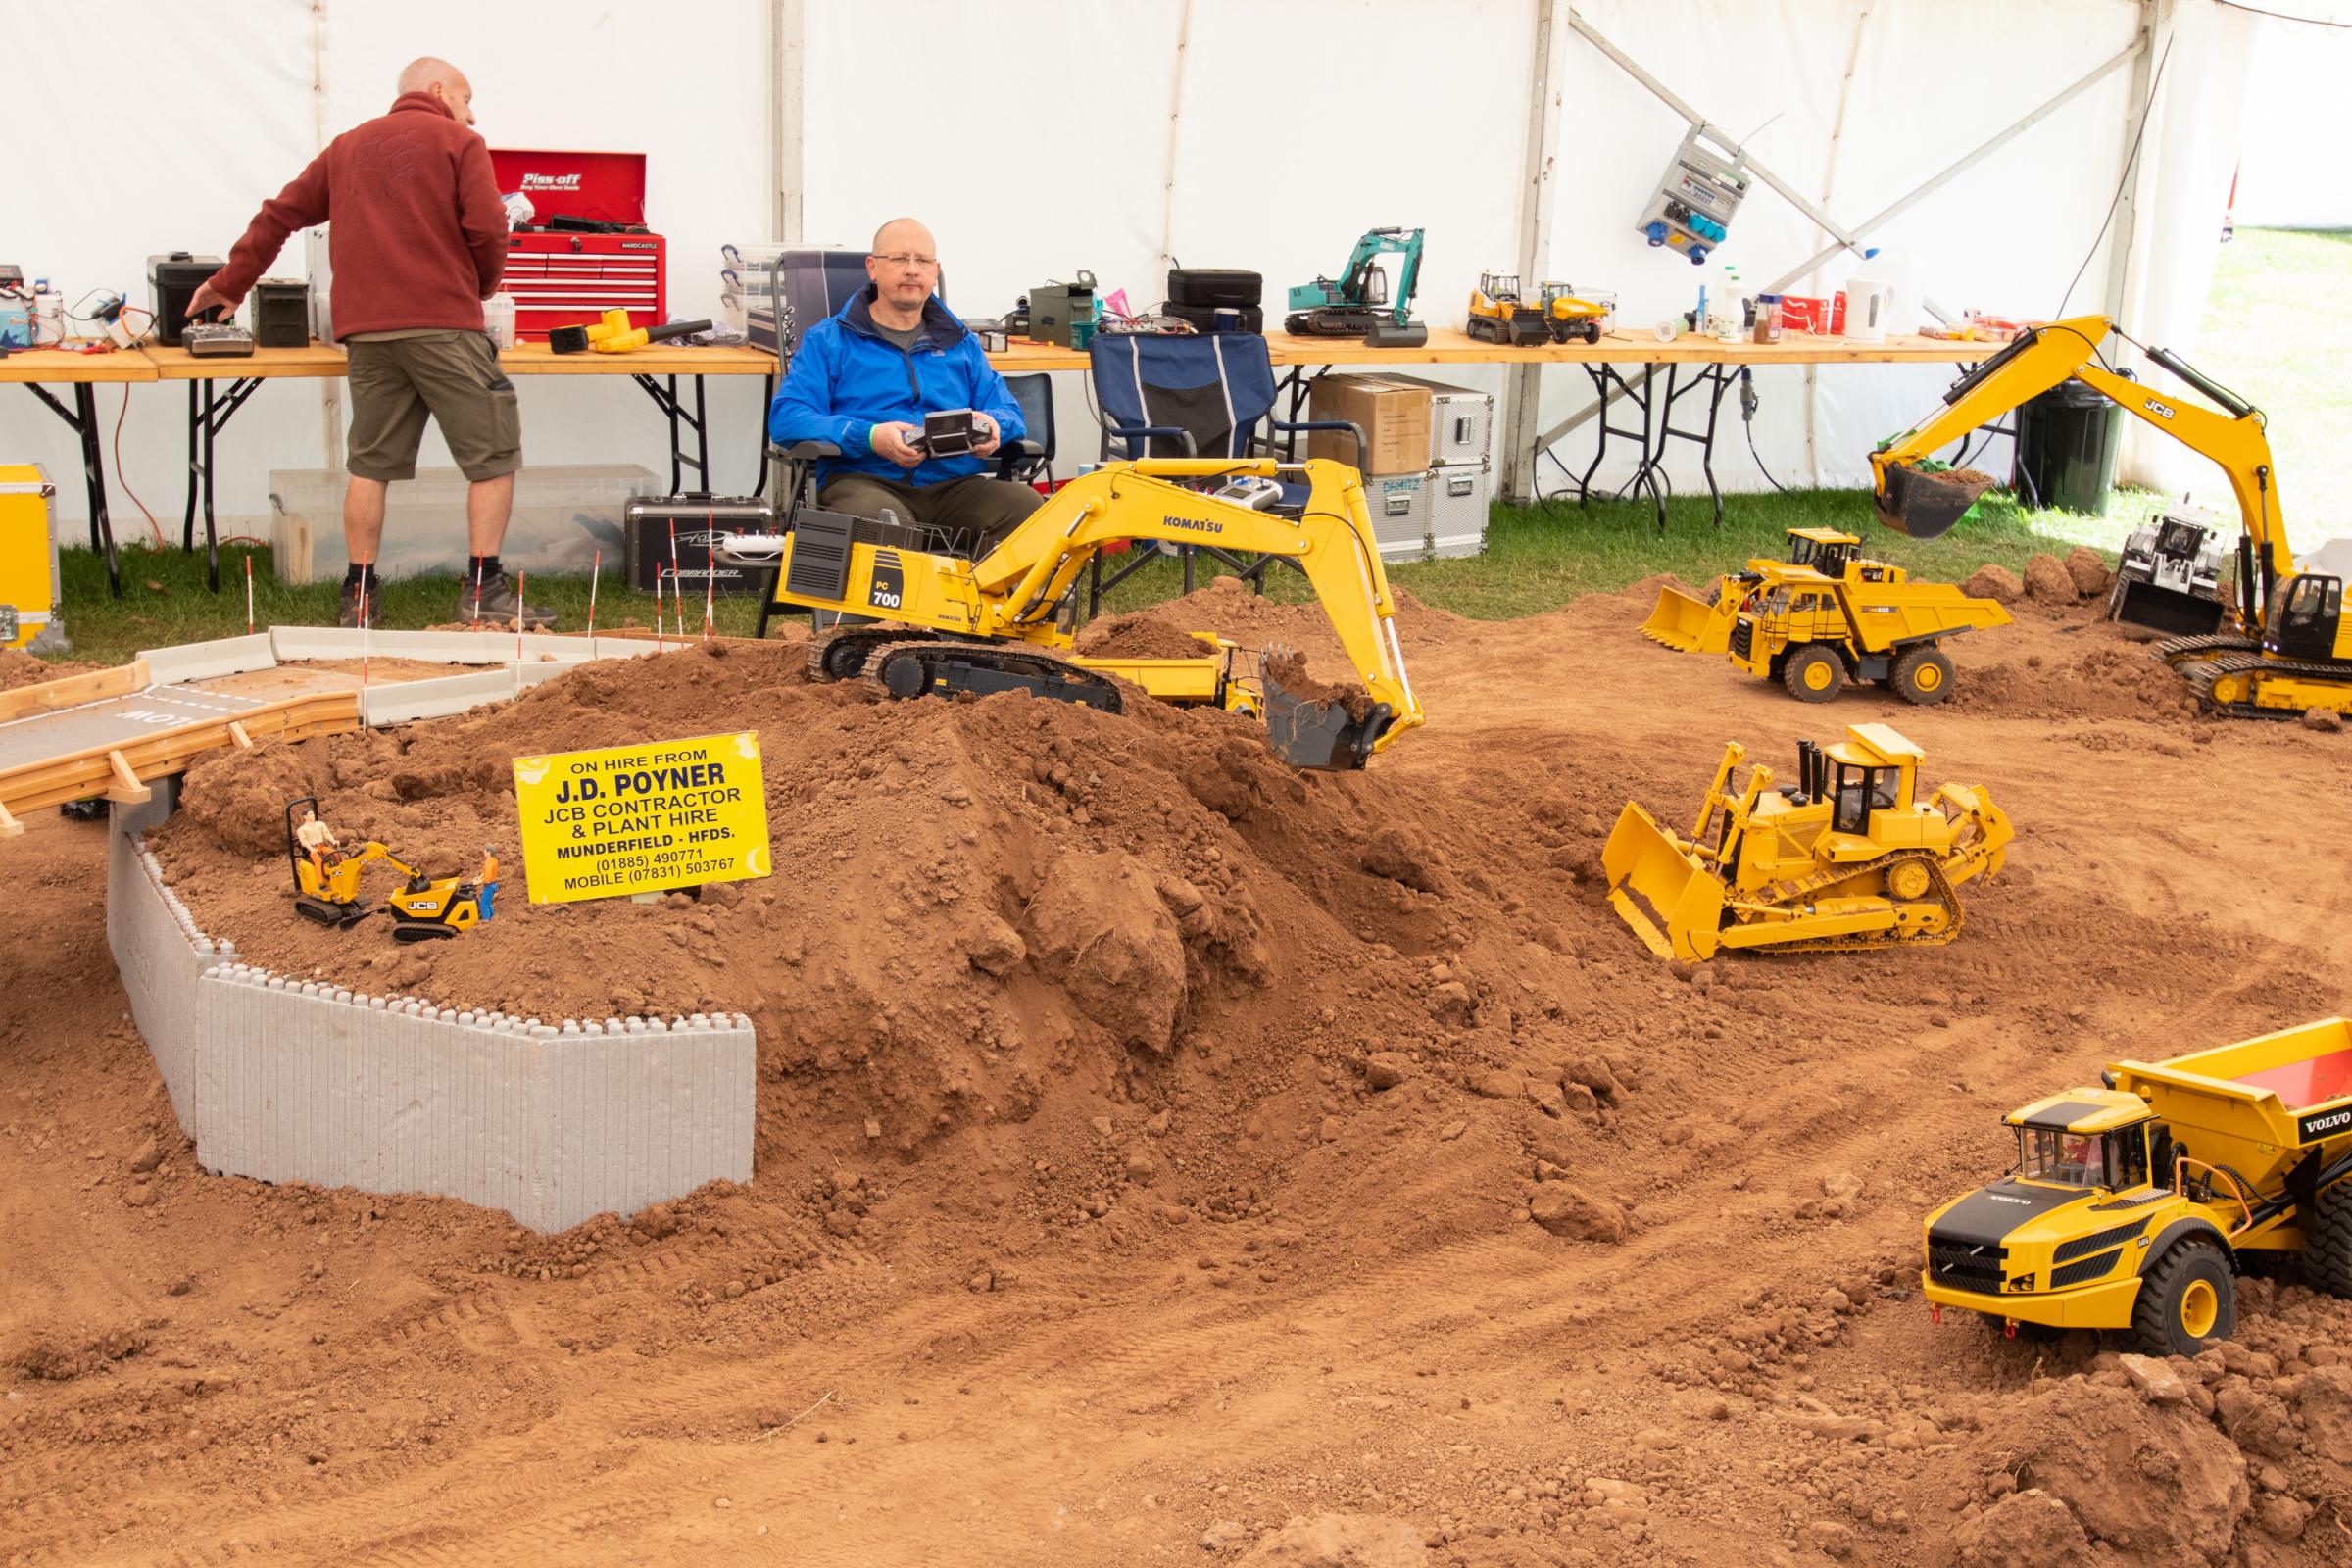 There was an impressive display of remote control trucks working on a building site at the Bromyard Gala 2022. Picture: Sofie Smith